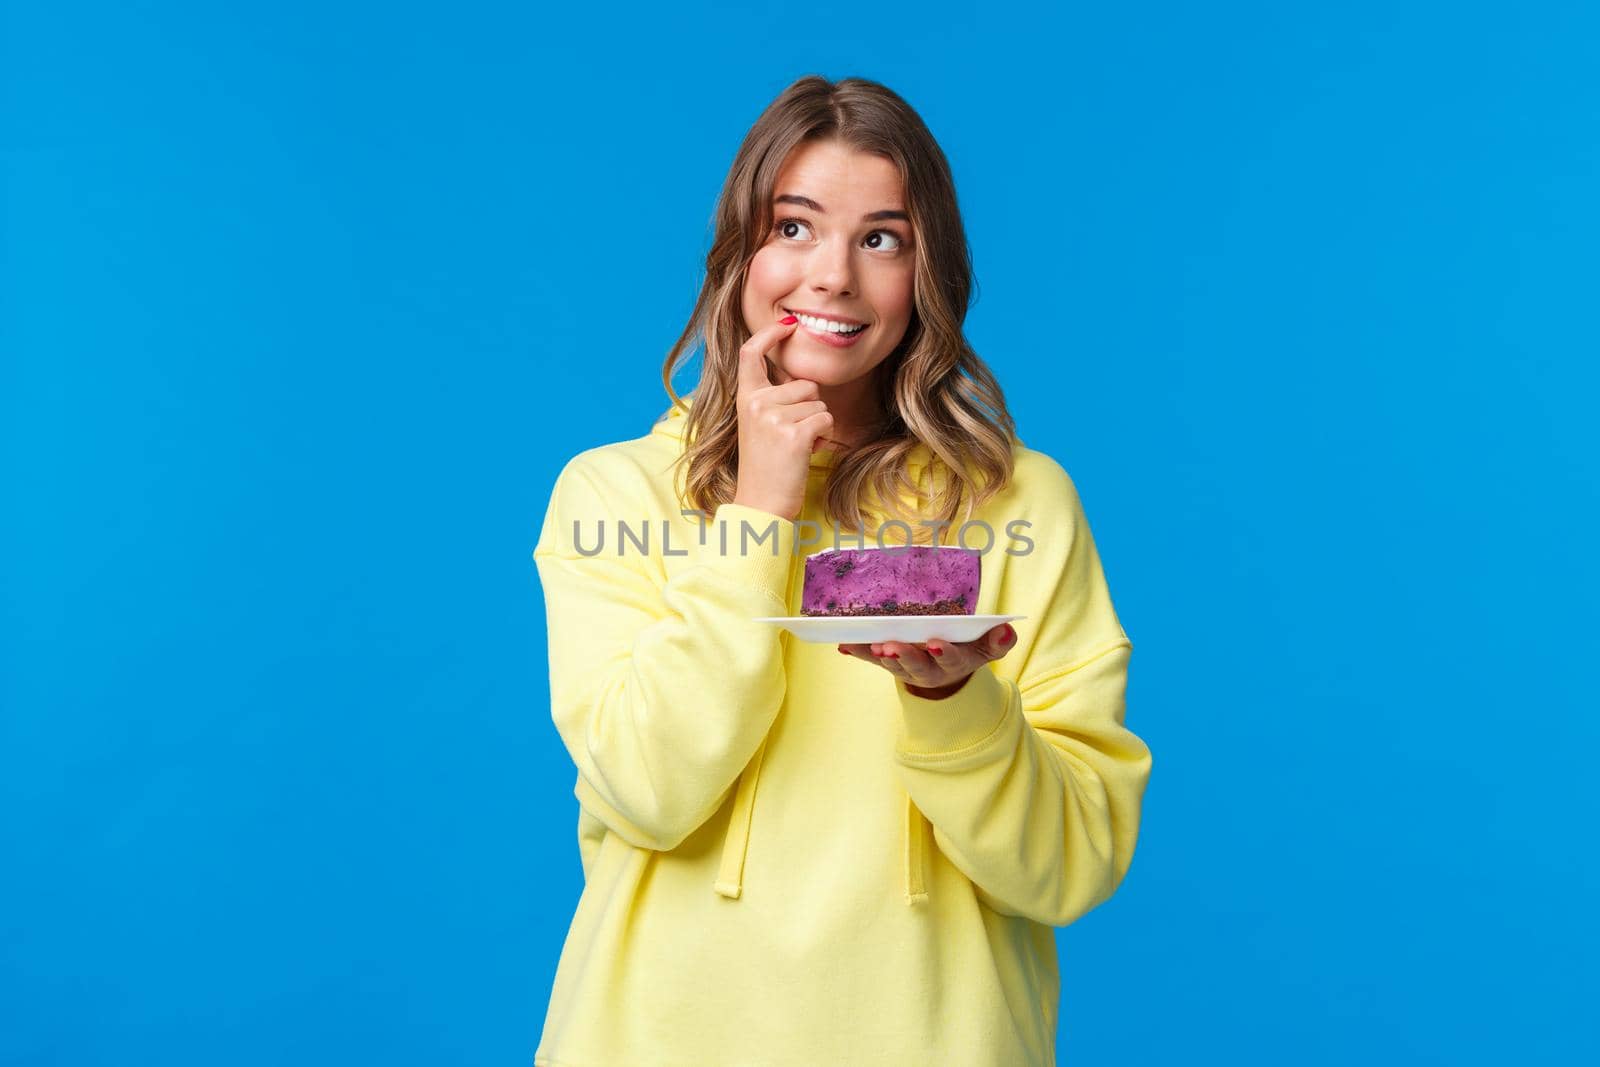 Celebration, party and lifestyle concept. Dreamy cute and silly blond girl thinking what to wish, biting finger and looking thoughtful up, smiling holding b-day cake, blue background.